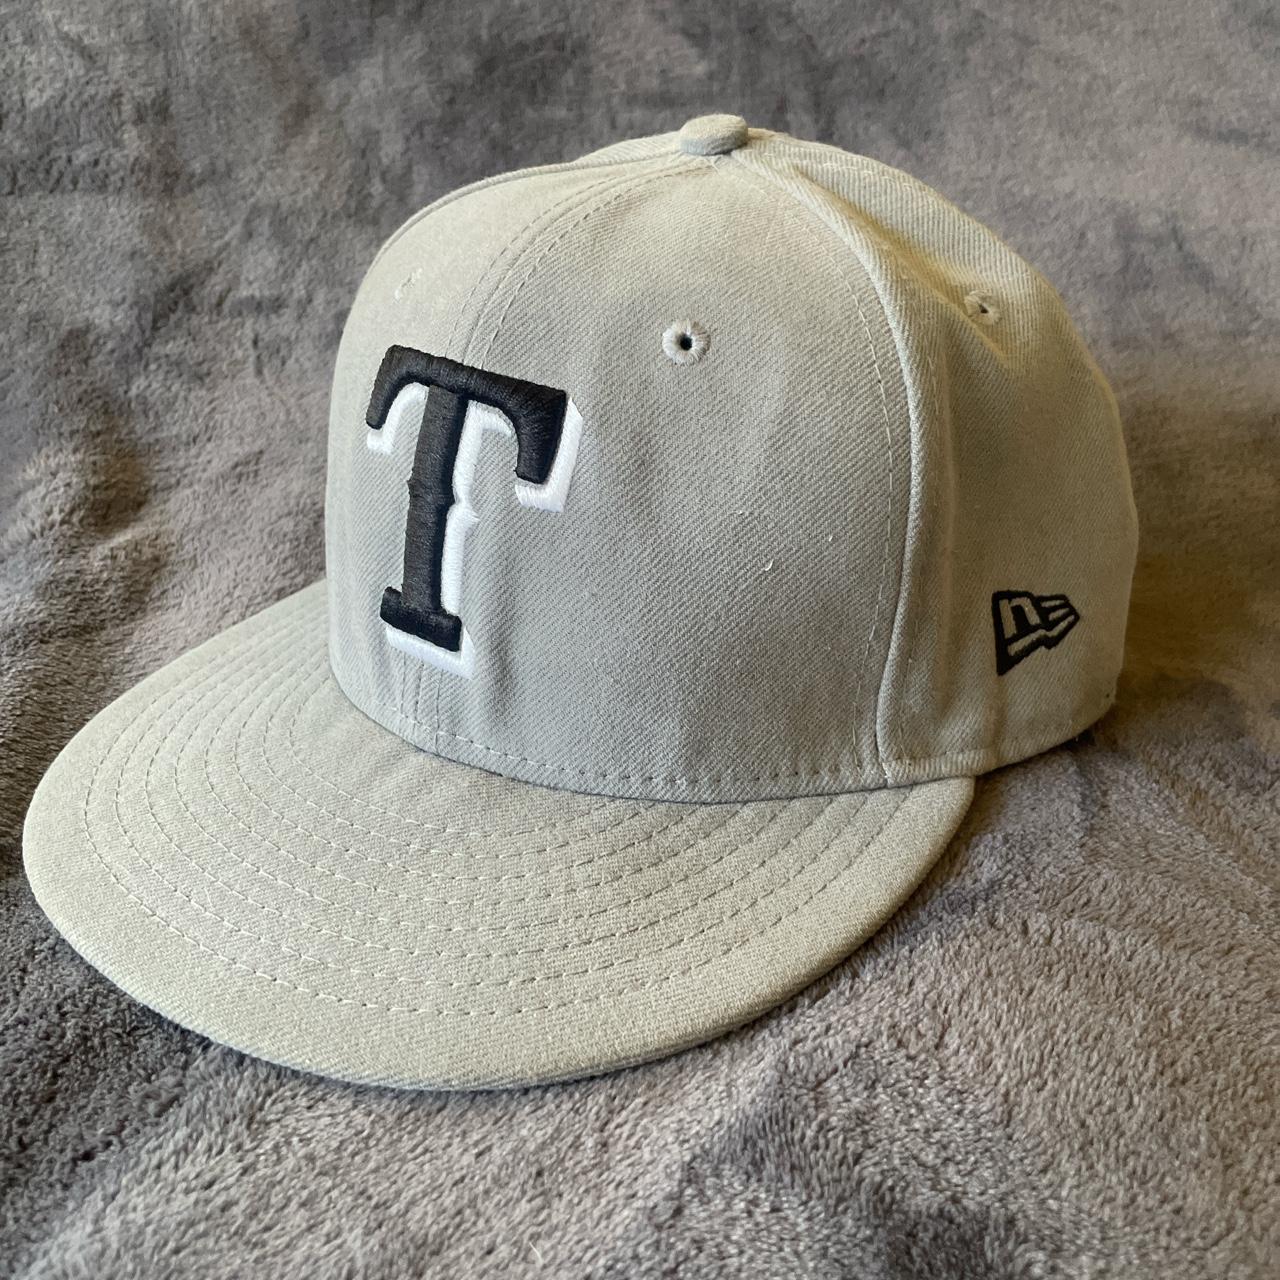 Texas Rangers New Era White on White 59FIFTY Fitted Hat